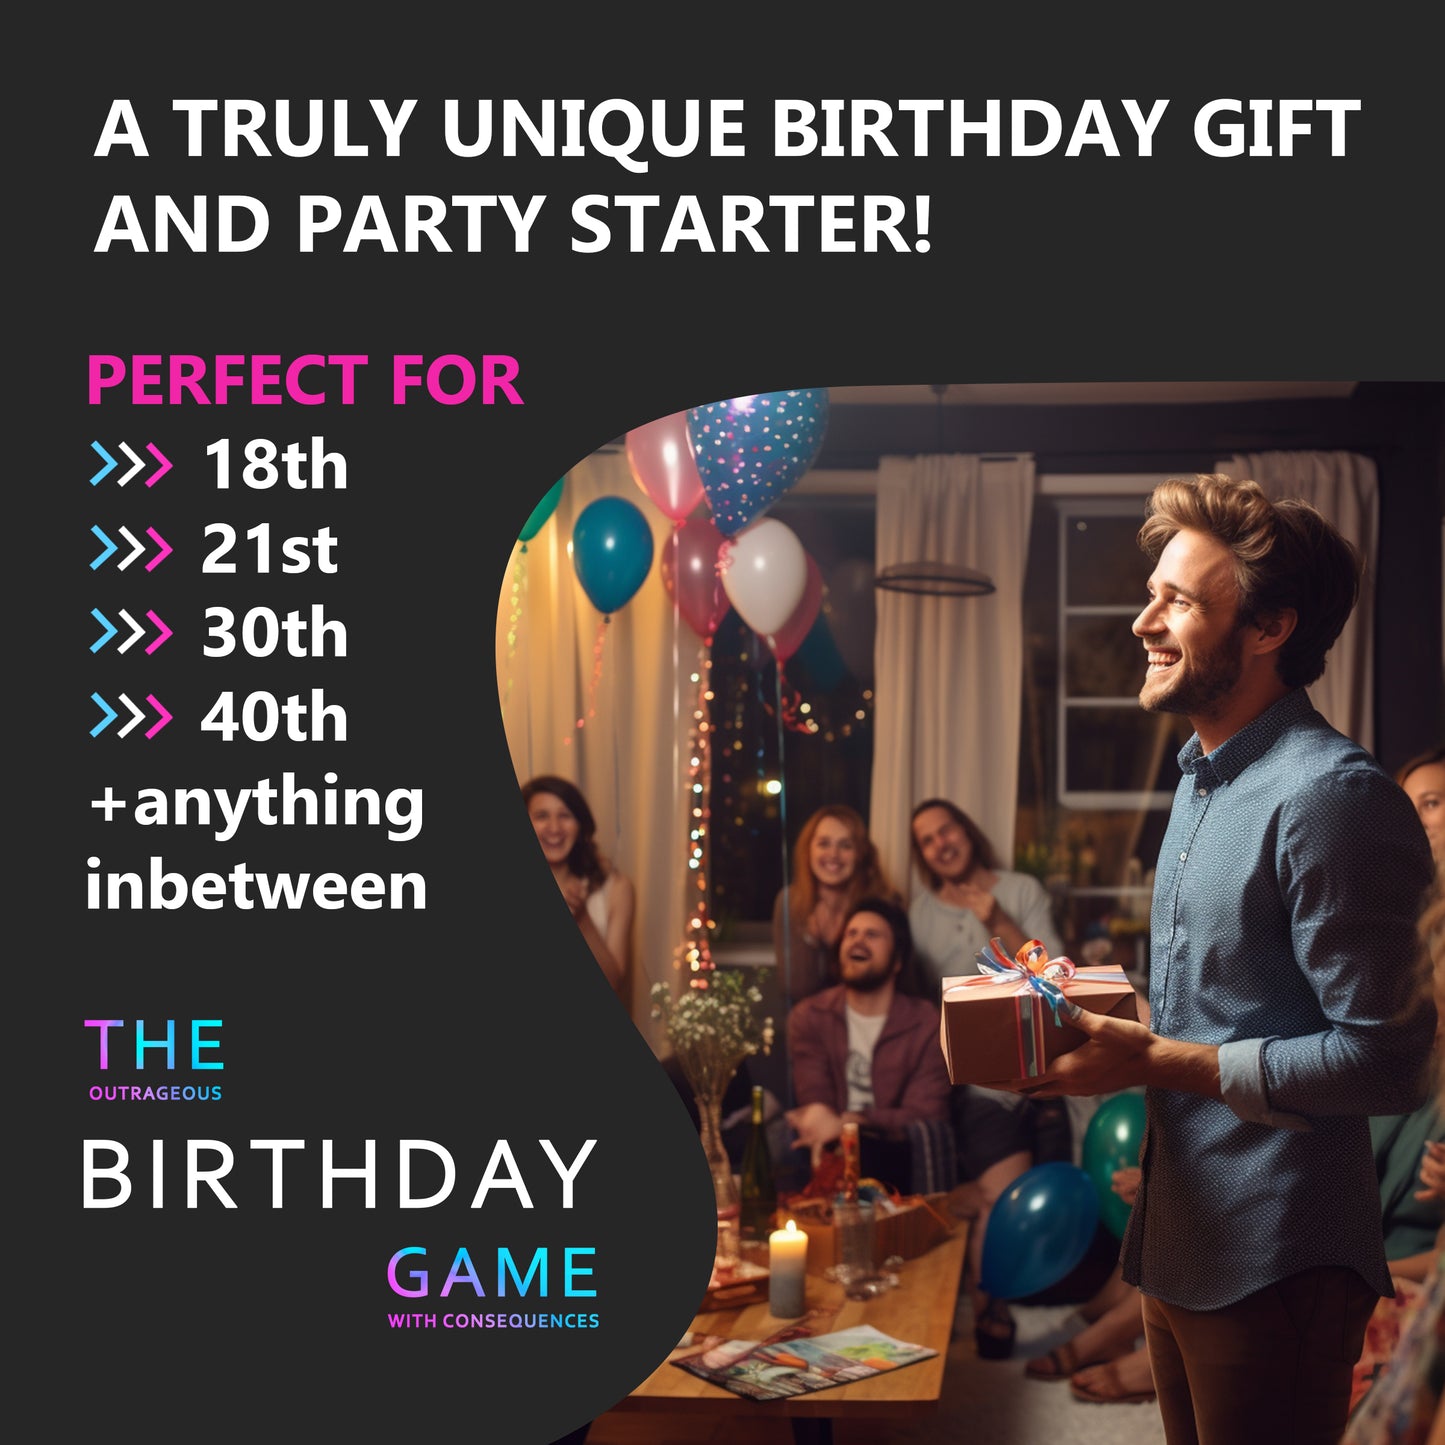 The Outrageous Birthday Card Game | Adult Games for Birthdays | Party Games | Birthday Gifts for Women & Men, Party Gift Ideas for Him or Her, Boyfriend and Girlfriend | Fun Card Games for Adults